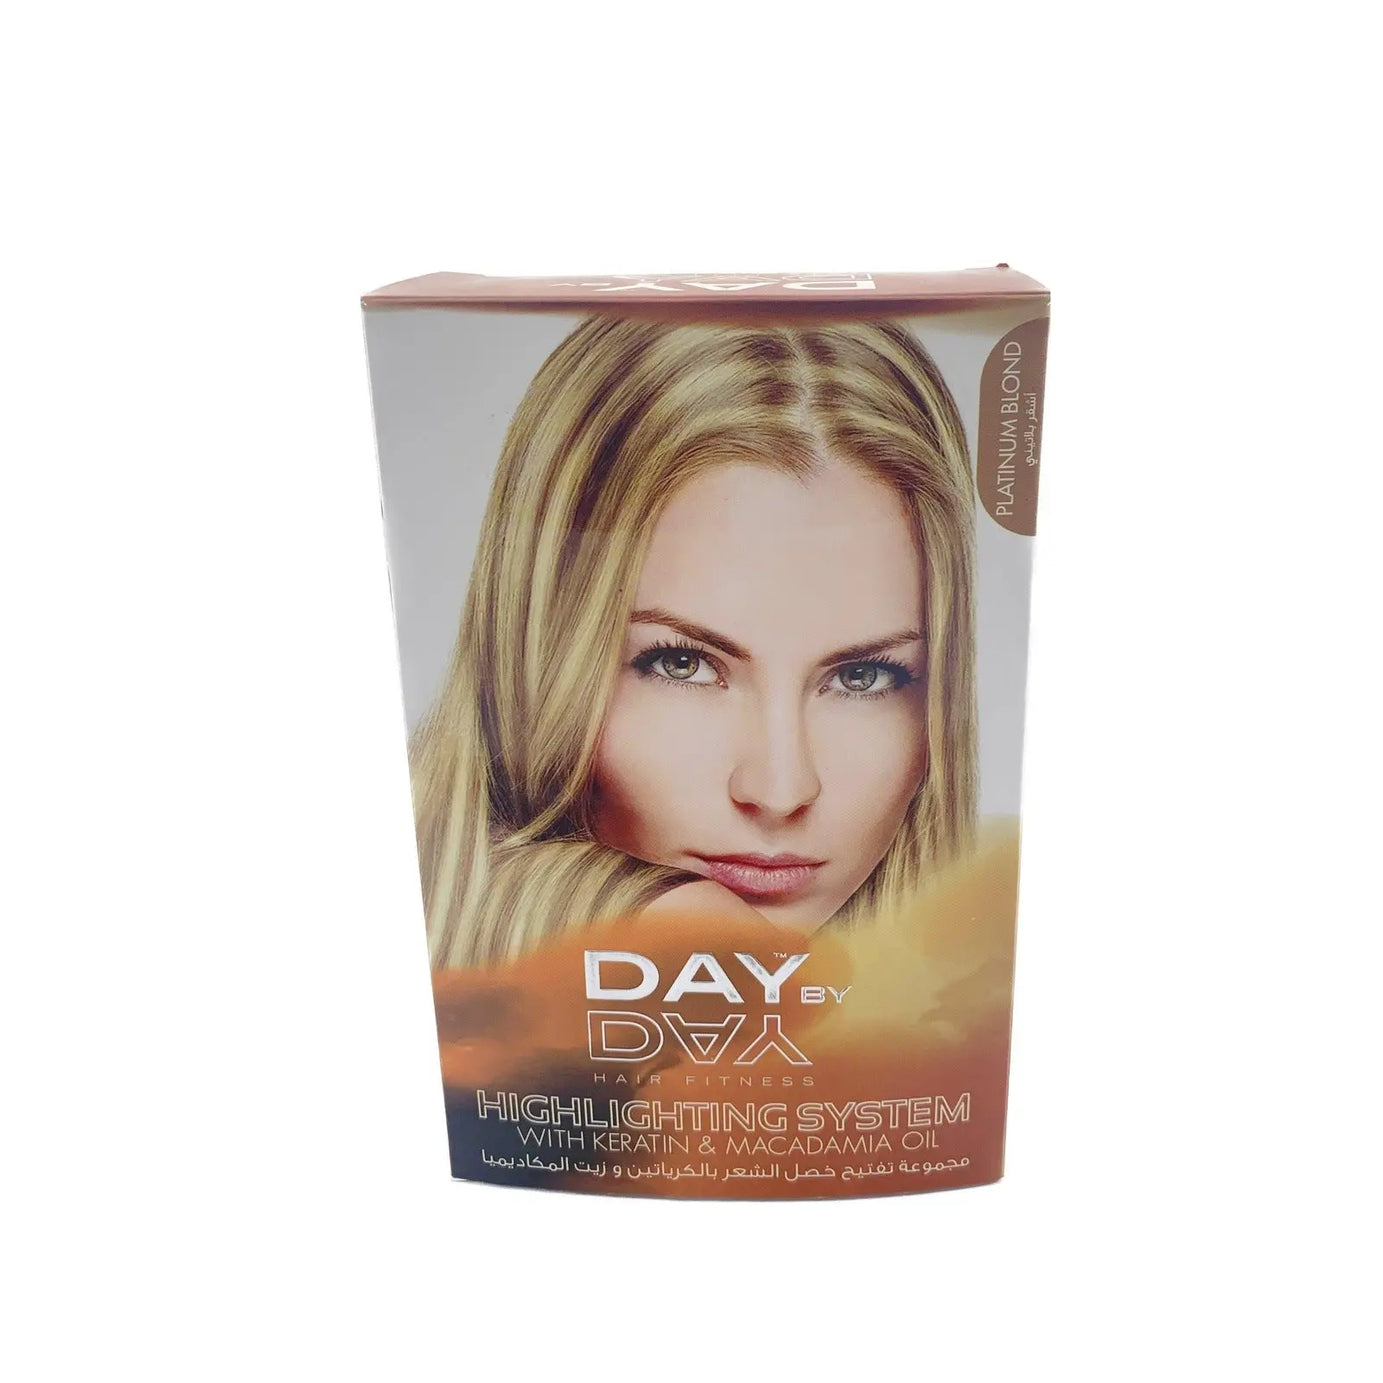 DAY BY DAY Hair Fitness Highlighting System With Keratin & Macadamia Oil Platinum Blond - JOLIE'S UAE